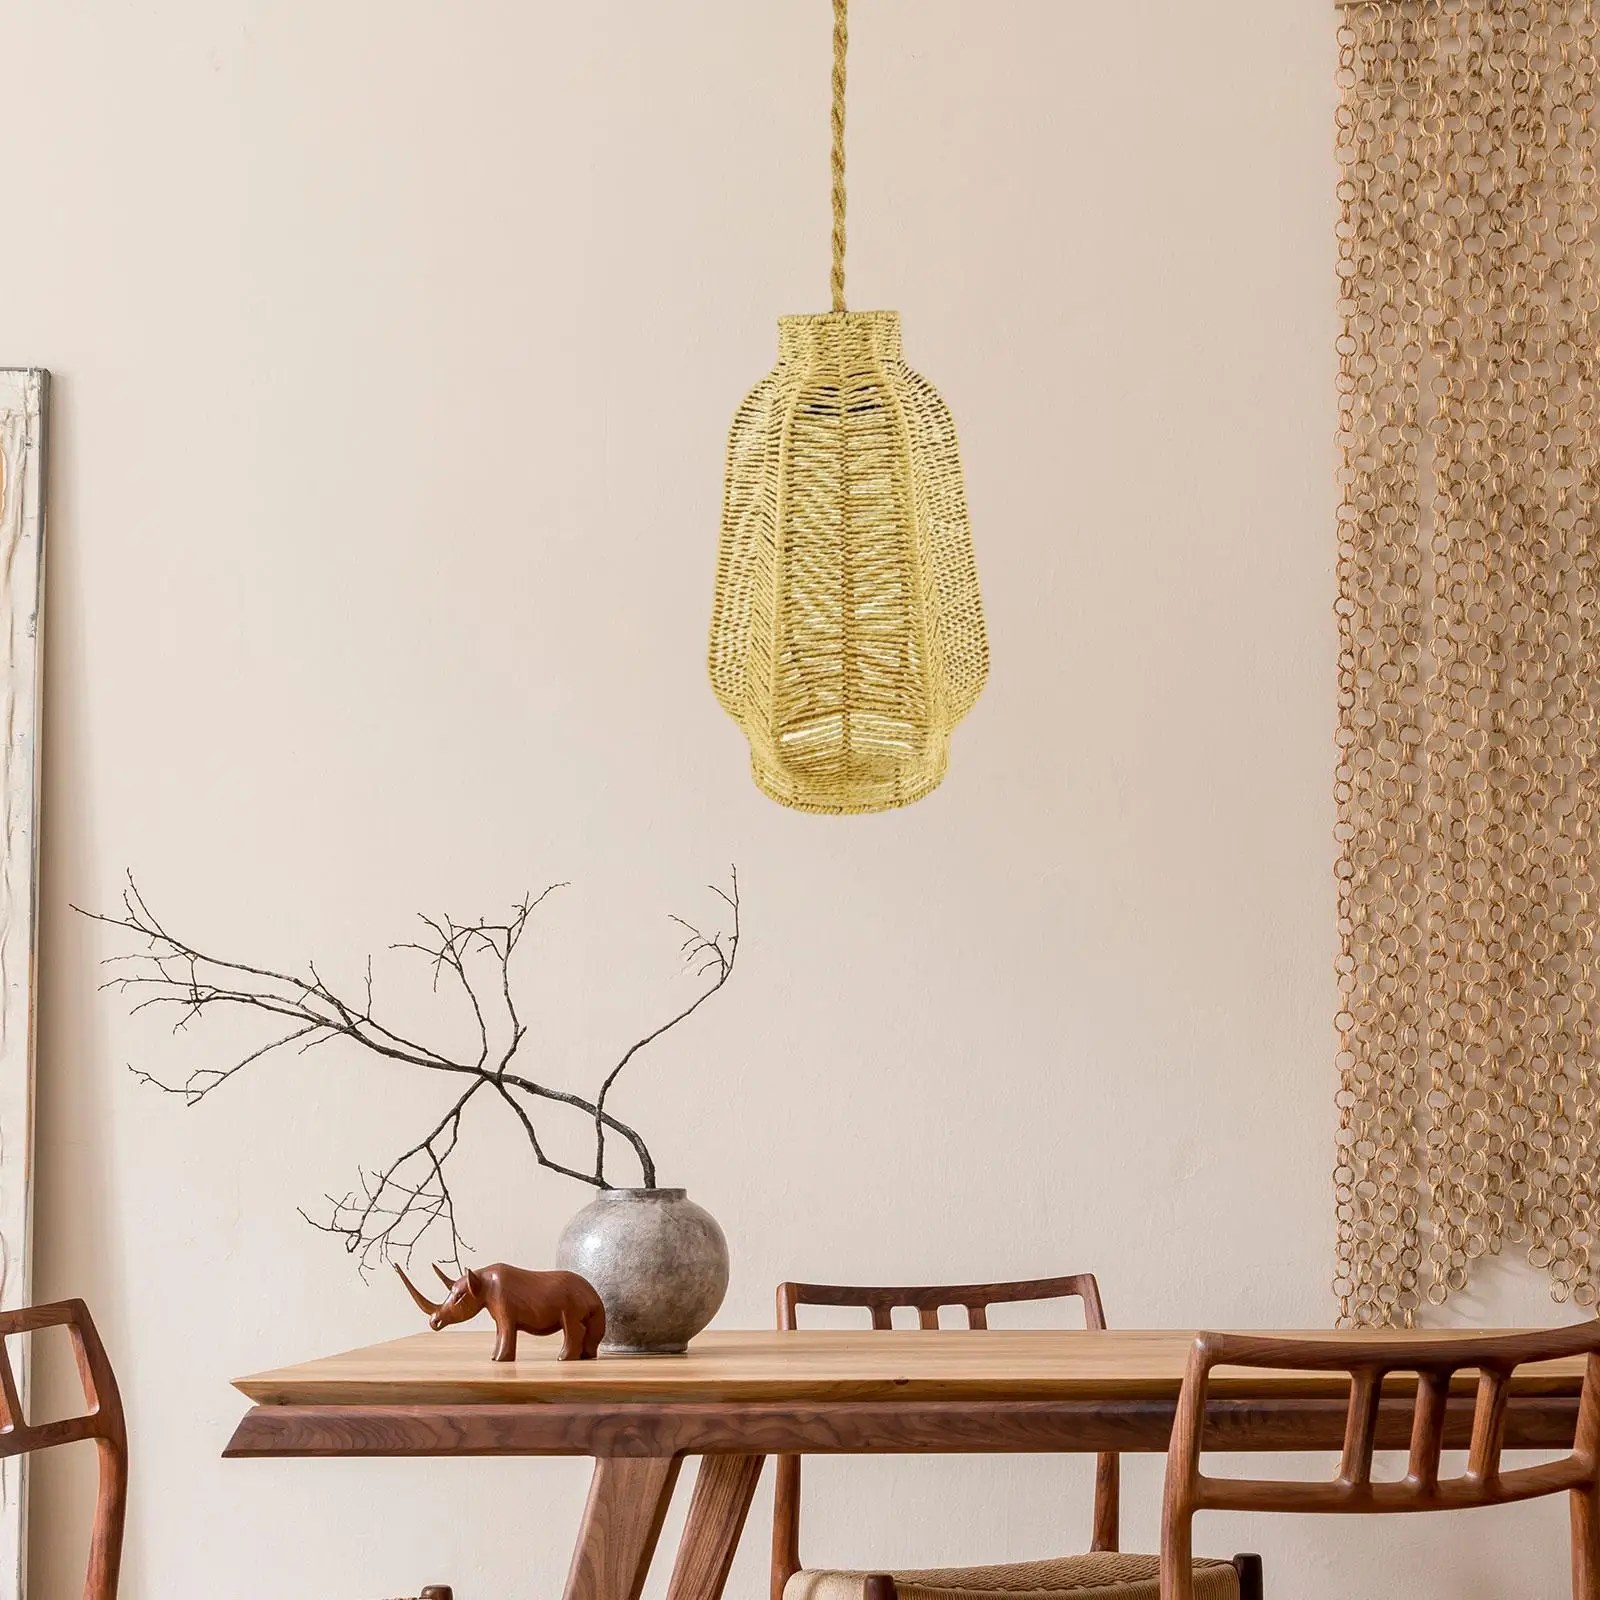 Handwoven Rattan Lamp Shade Bulb Guard Chandelier Shade Paper Rope Lampshade Light Fixture Shade for Teahouse Kitchen Cafe